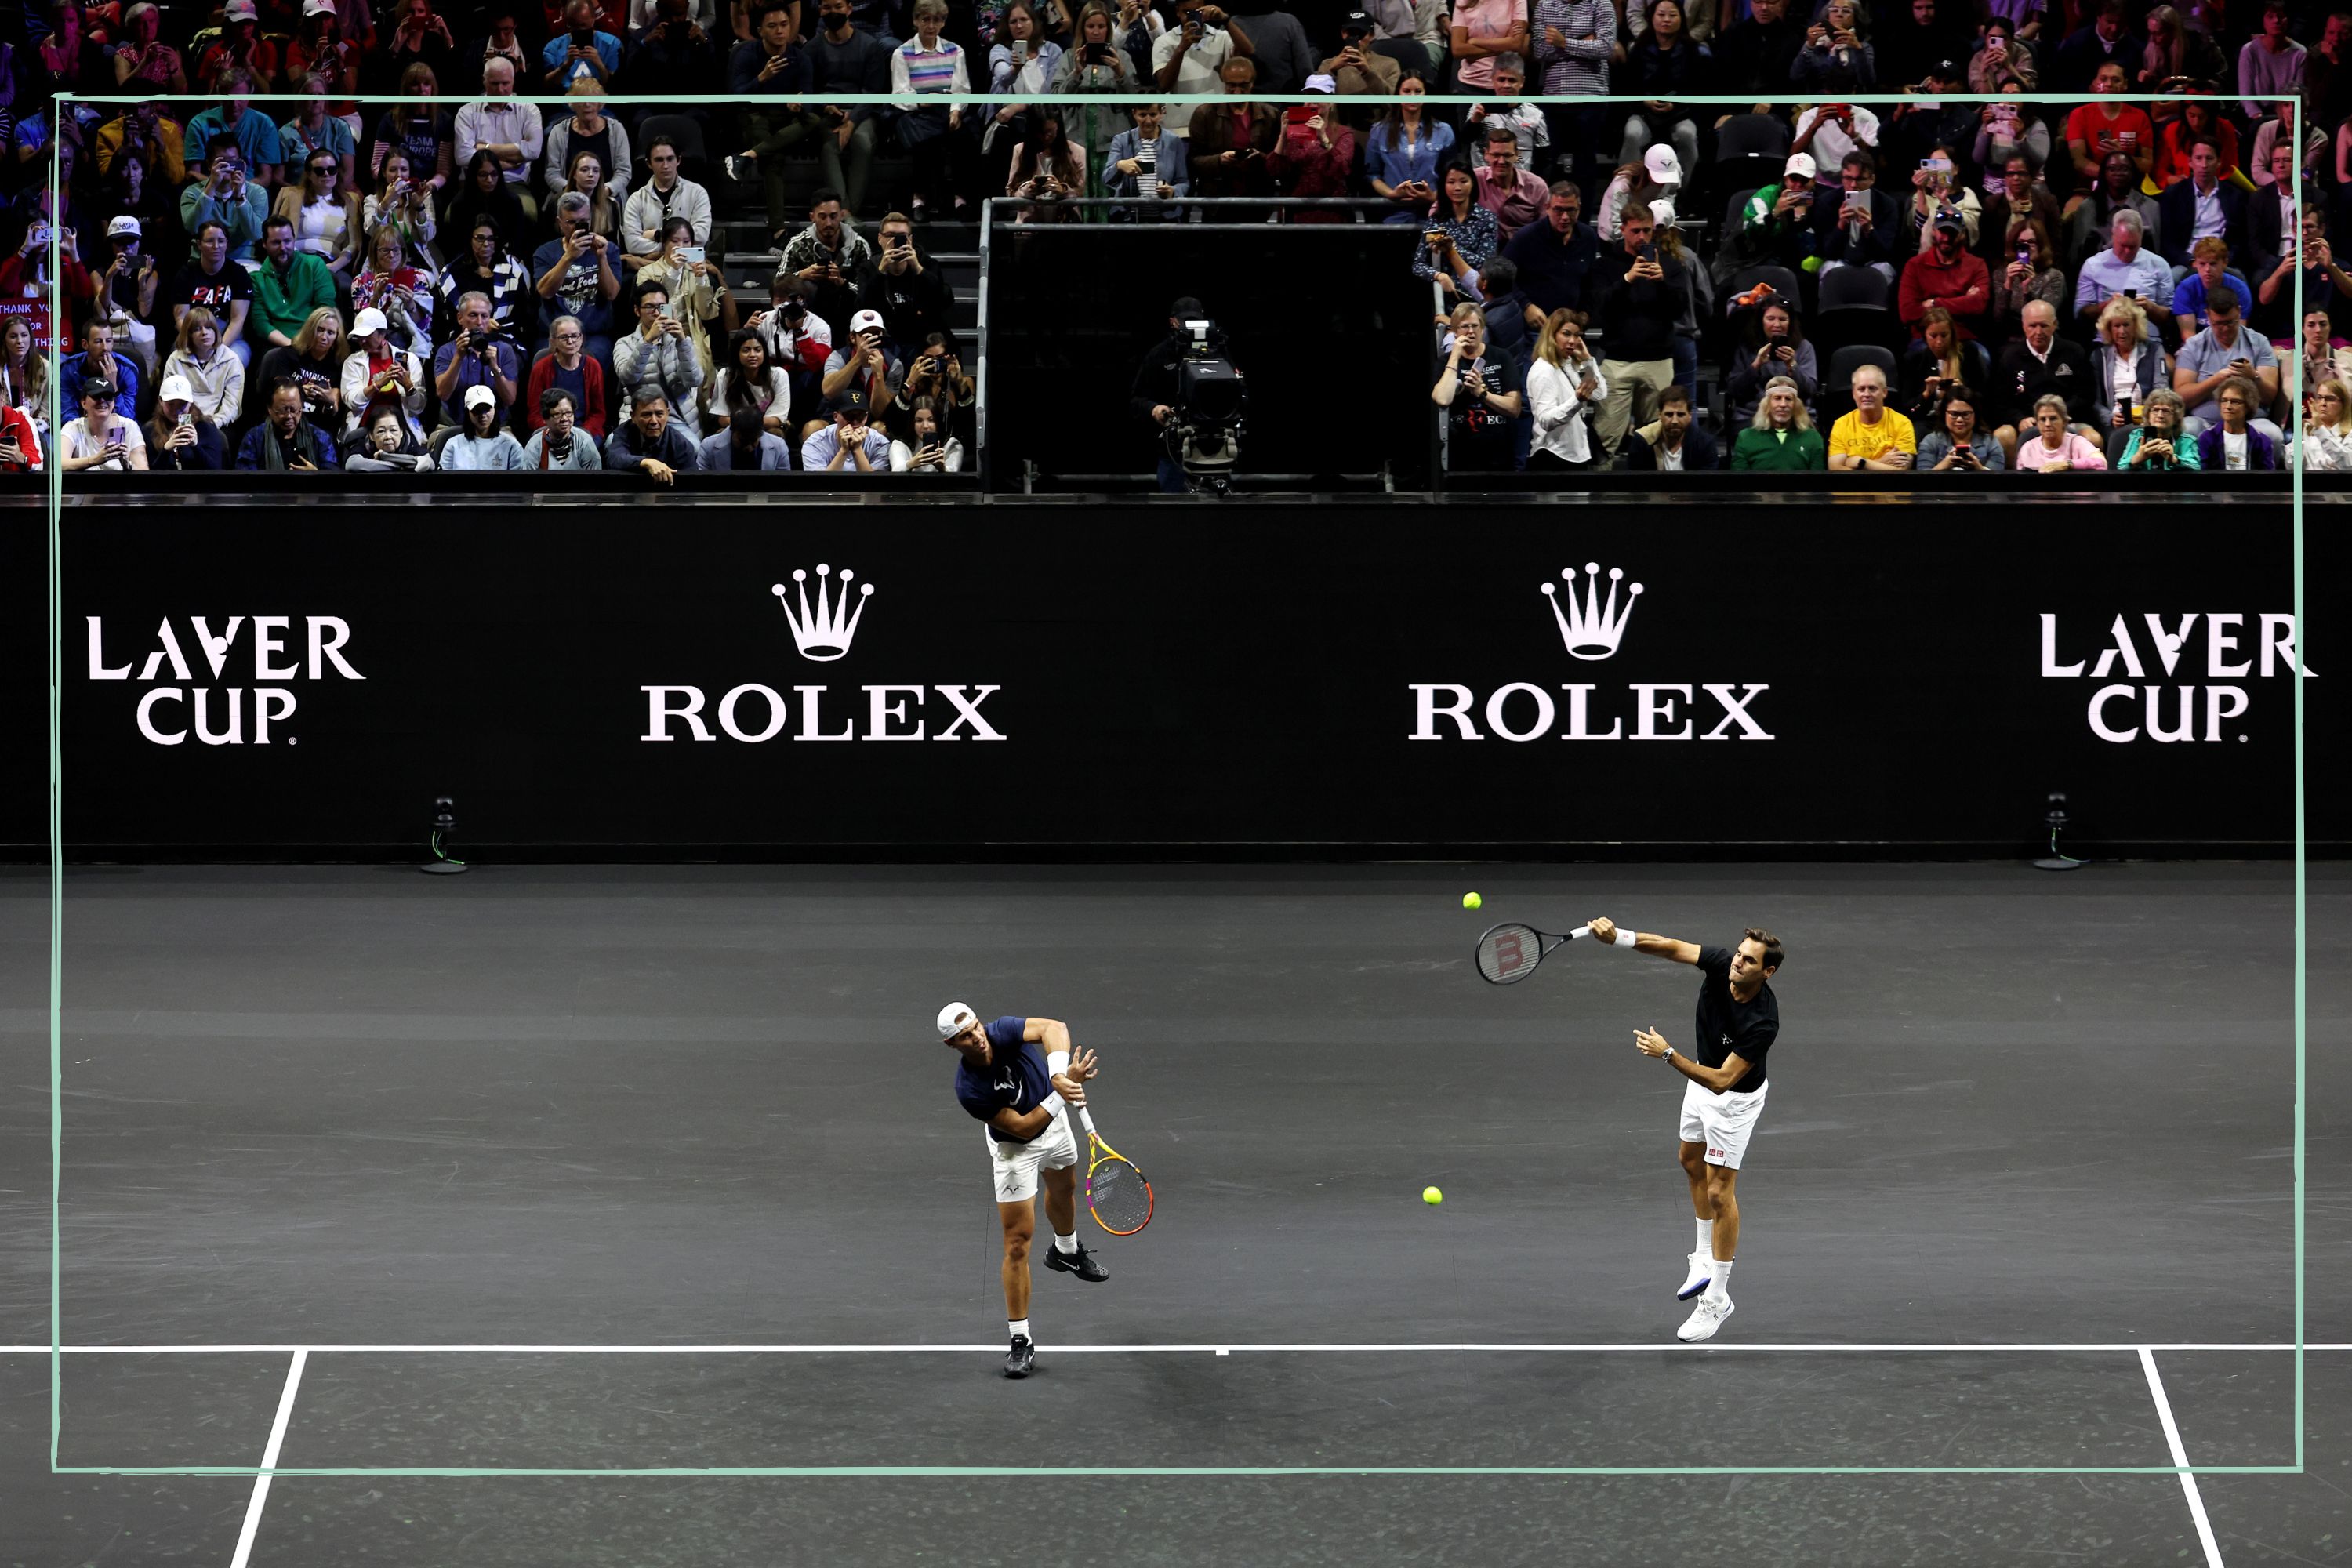 How to watch Laver Cup 2022